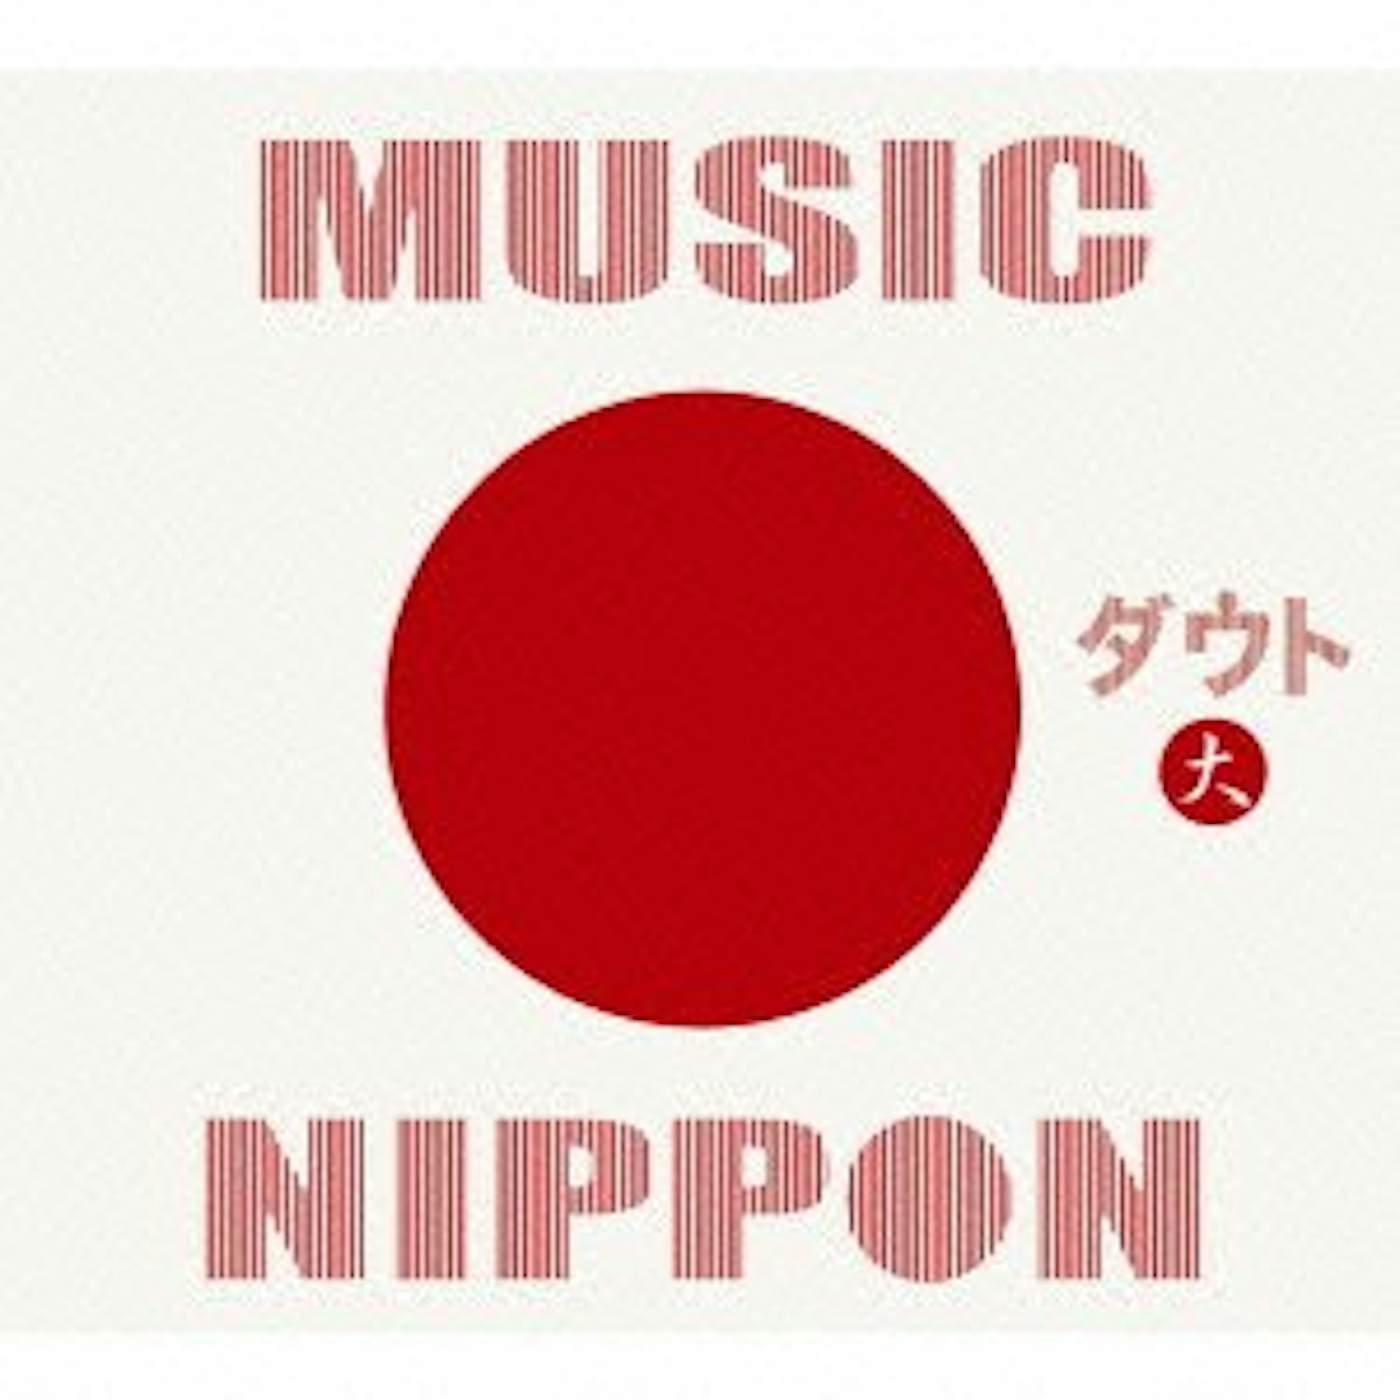 D=OUT MUSIC NIPPON: DAI CD